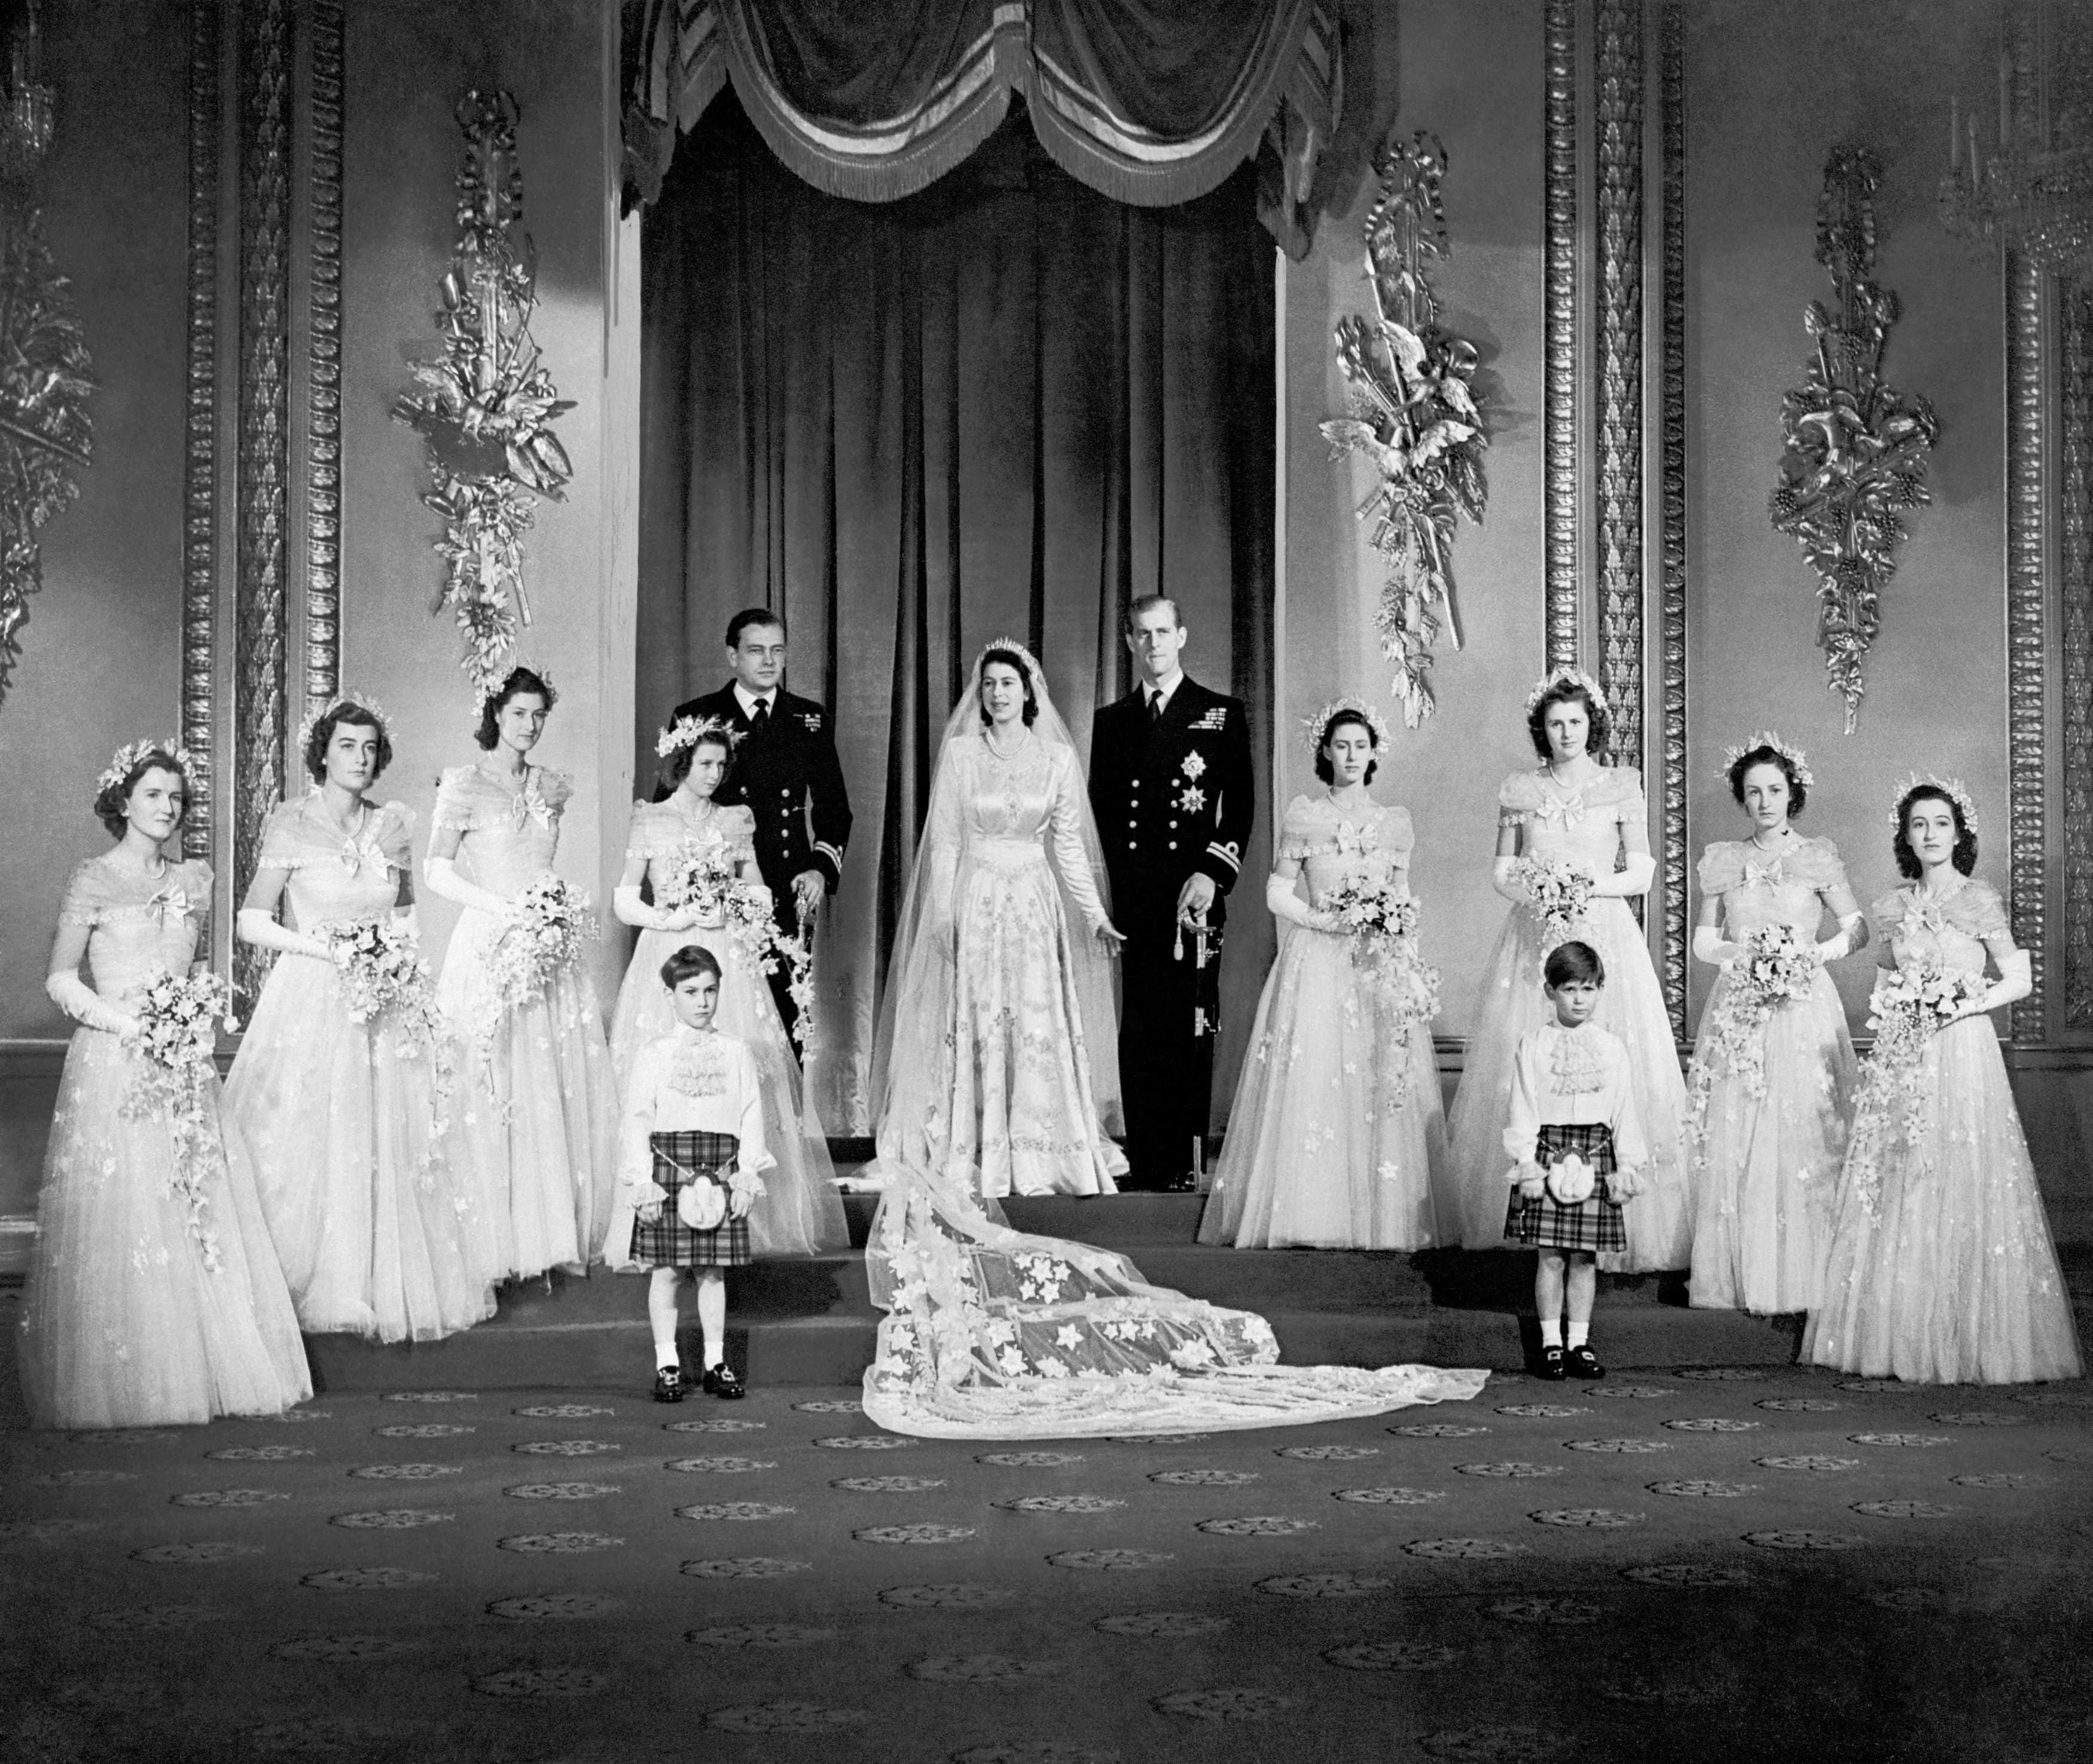 Princess Elizabeth and the Duke of Edinburgh with their eight bridesmaids in the Throne Room at Buckingham Palace on their wedding day